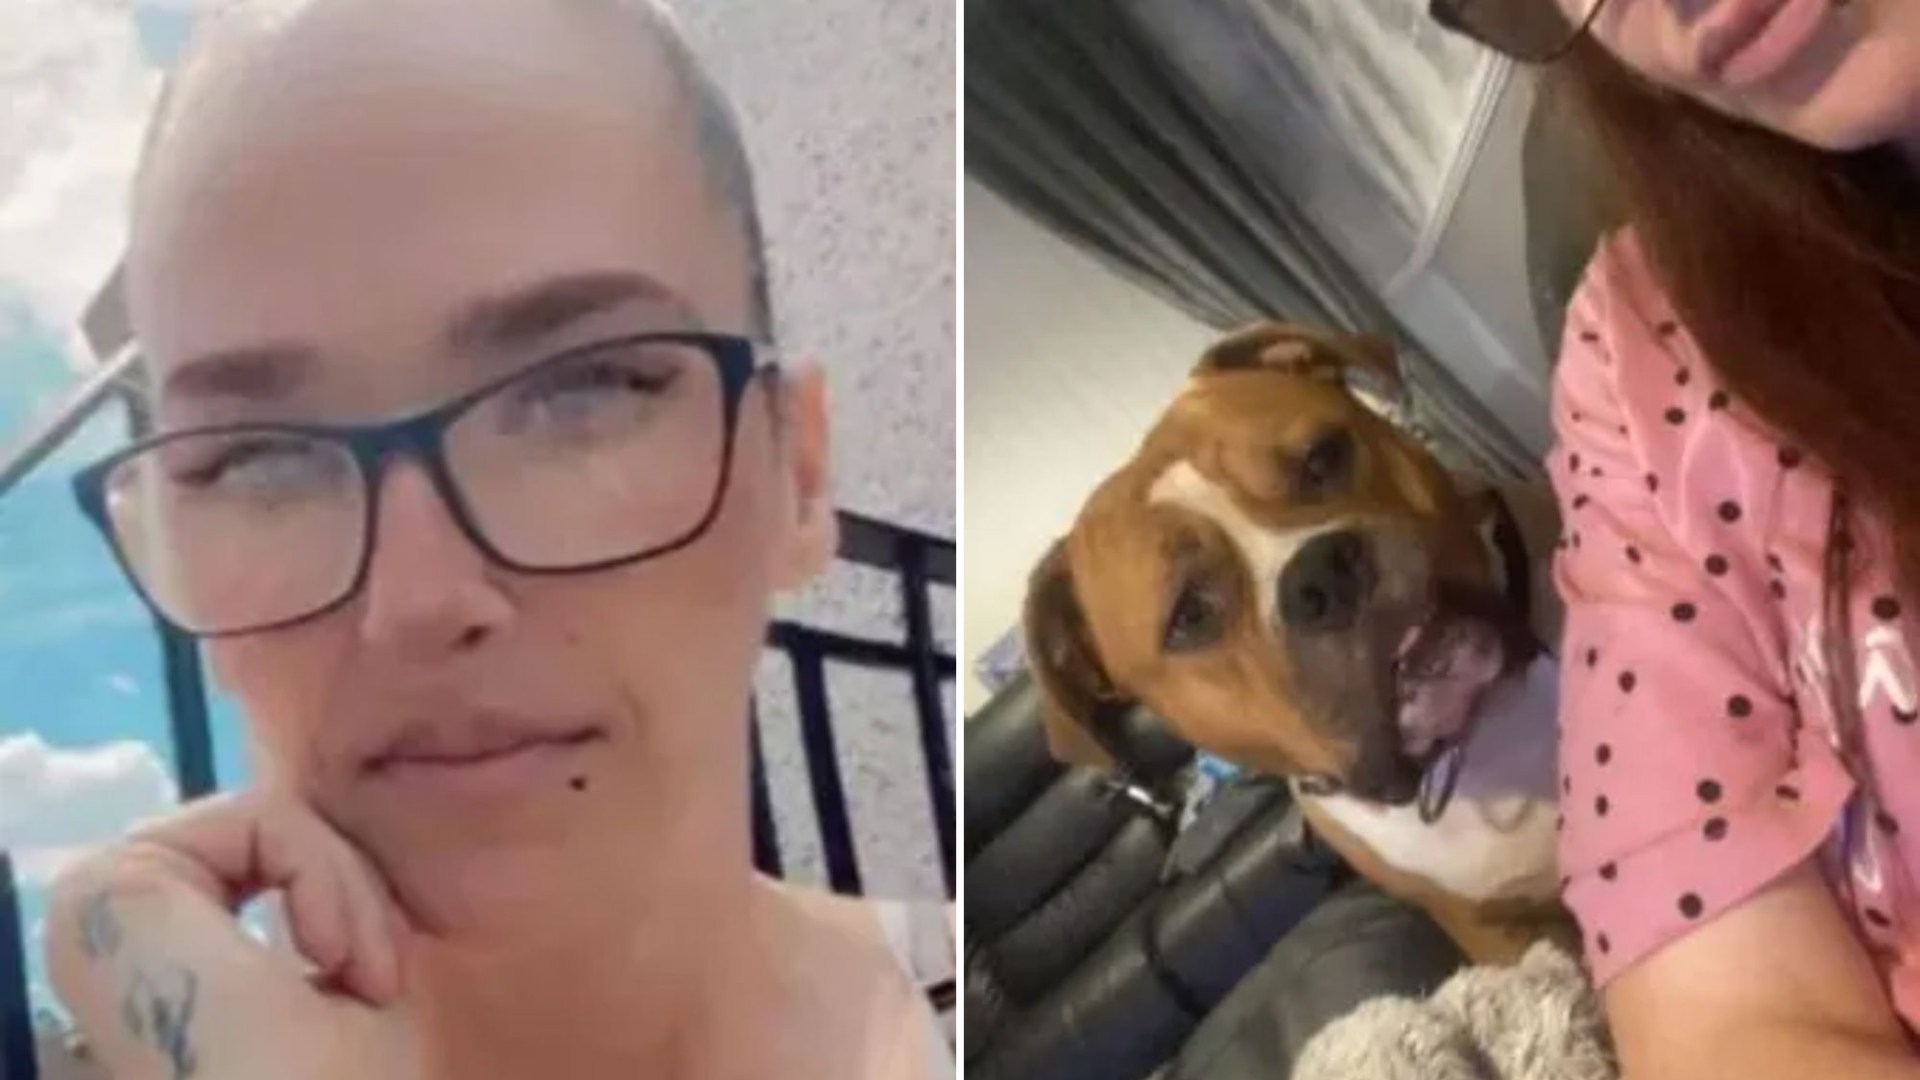 Mum mauled to death by her pet dog was ‘suffering seizure’ when beast pounced as family pay tribute to ‘beautiful soul’ [Video]